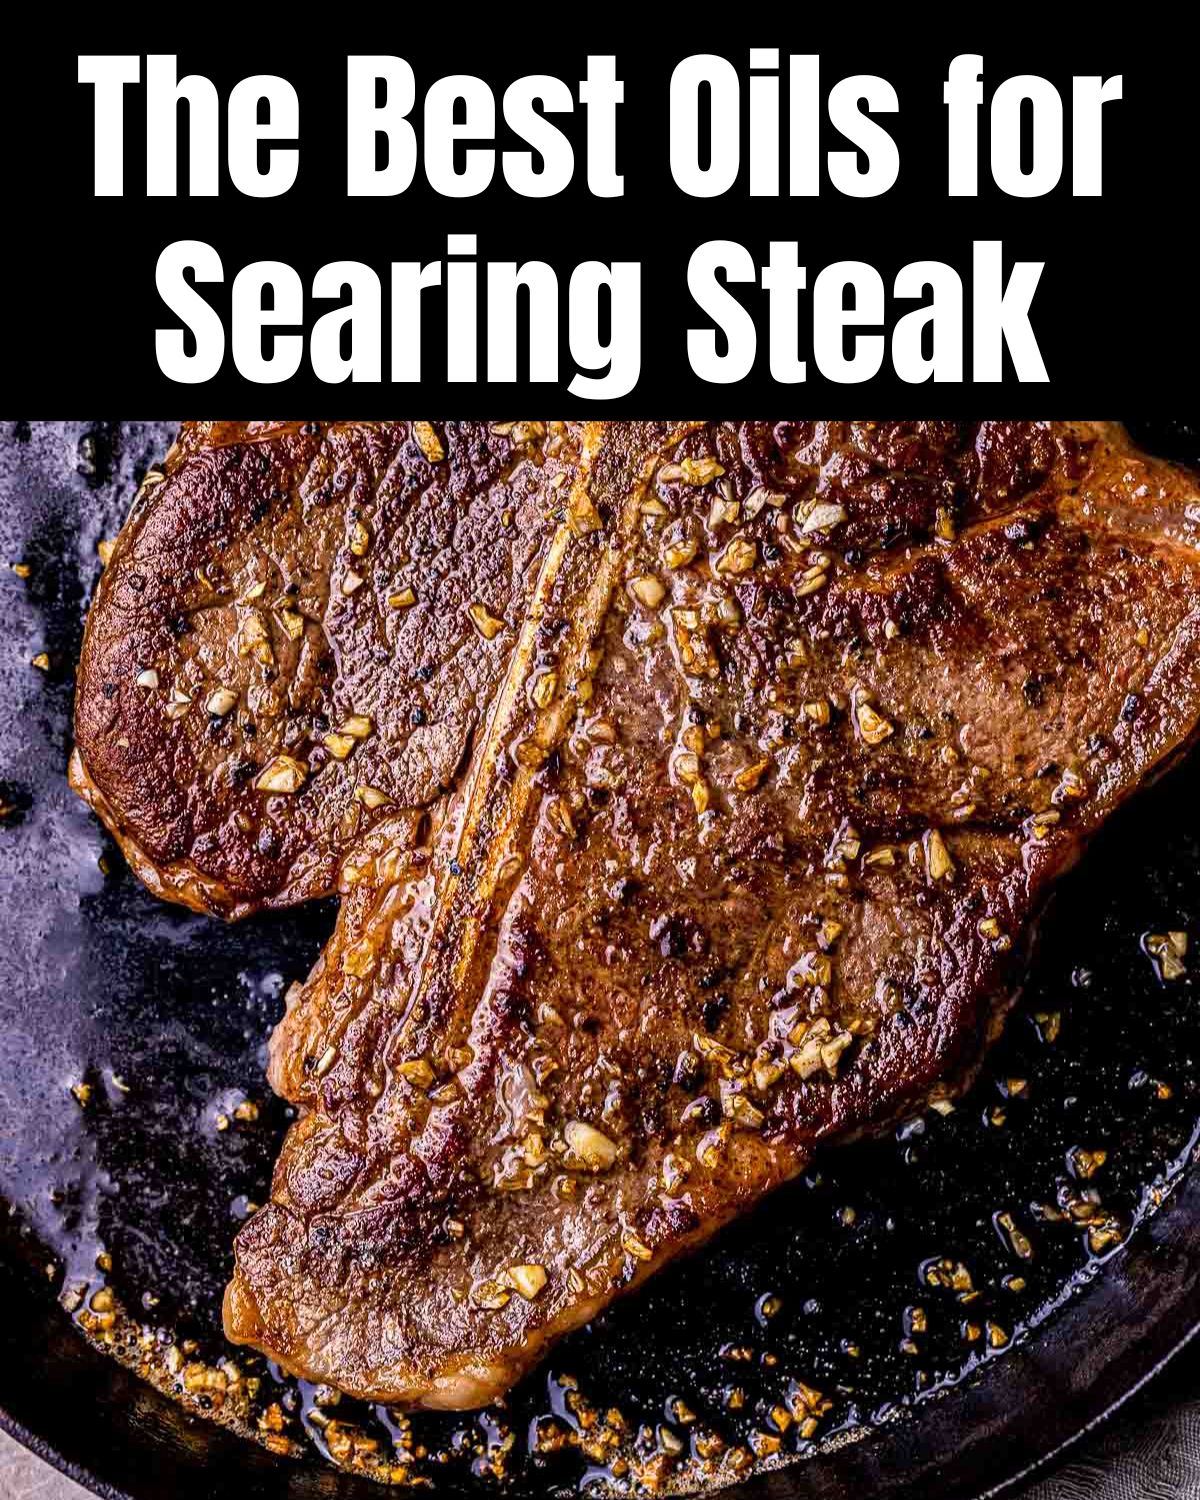 a seared steak in a pan with text overlay.